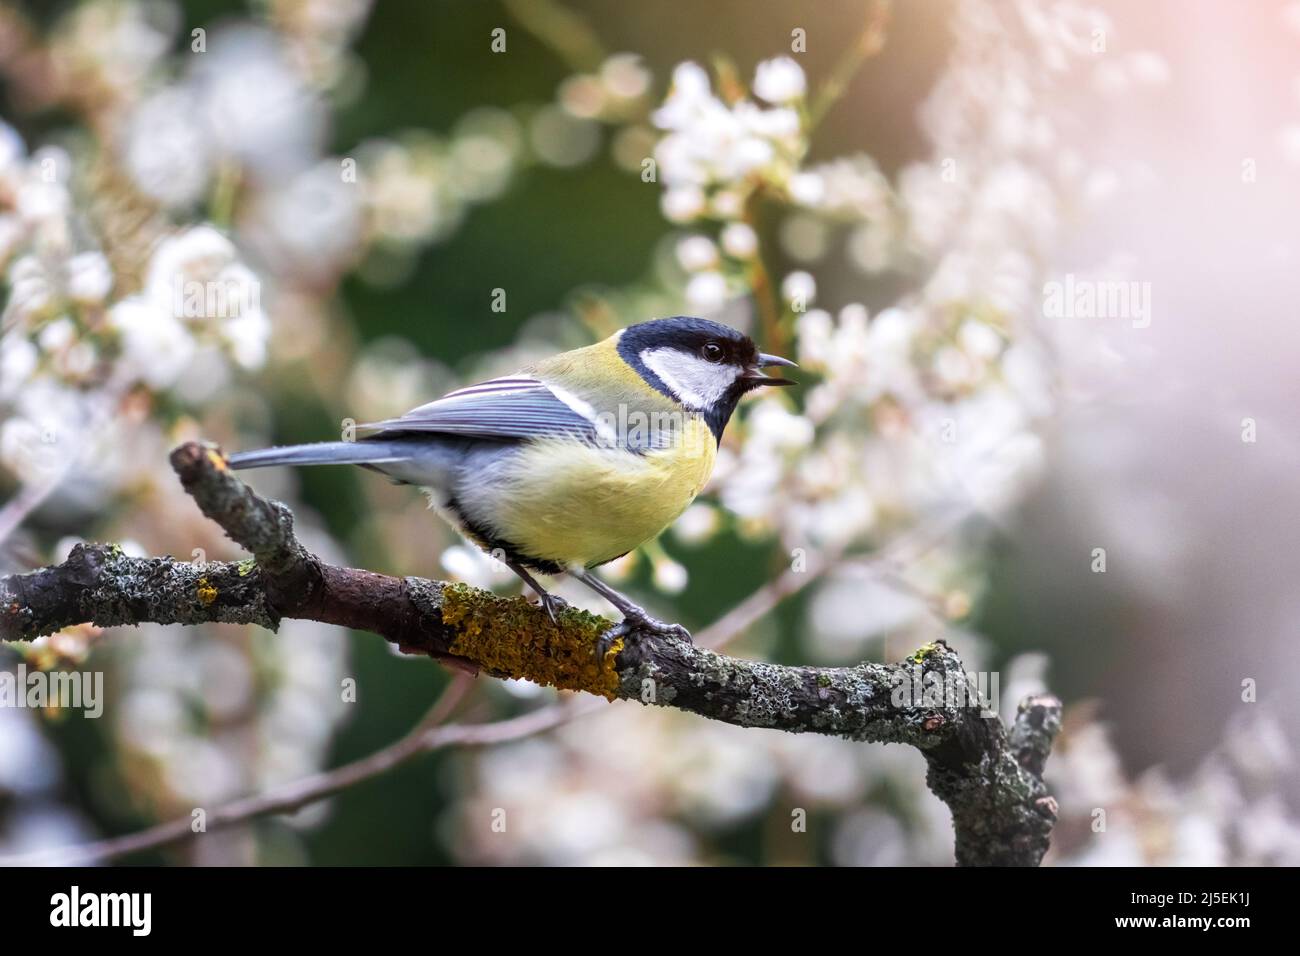 Small parus (tit or bluetit) on twig with cherry flowers on spring garden. Bird photography Stock Photo